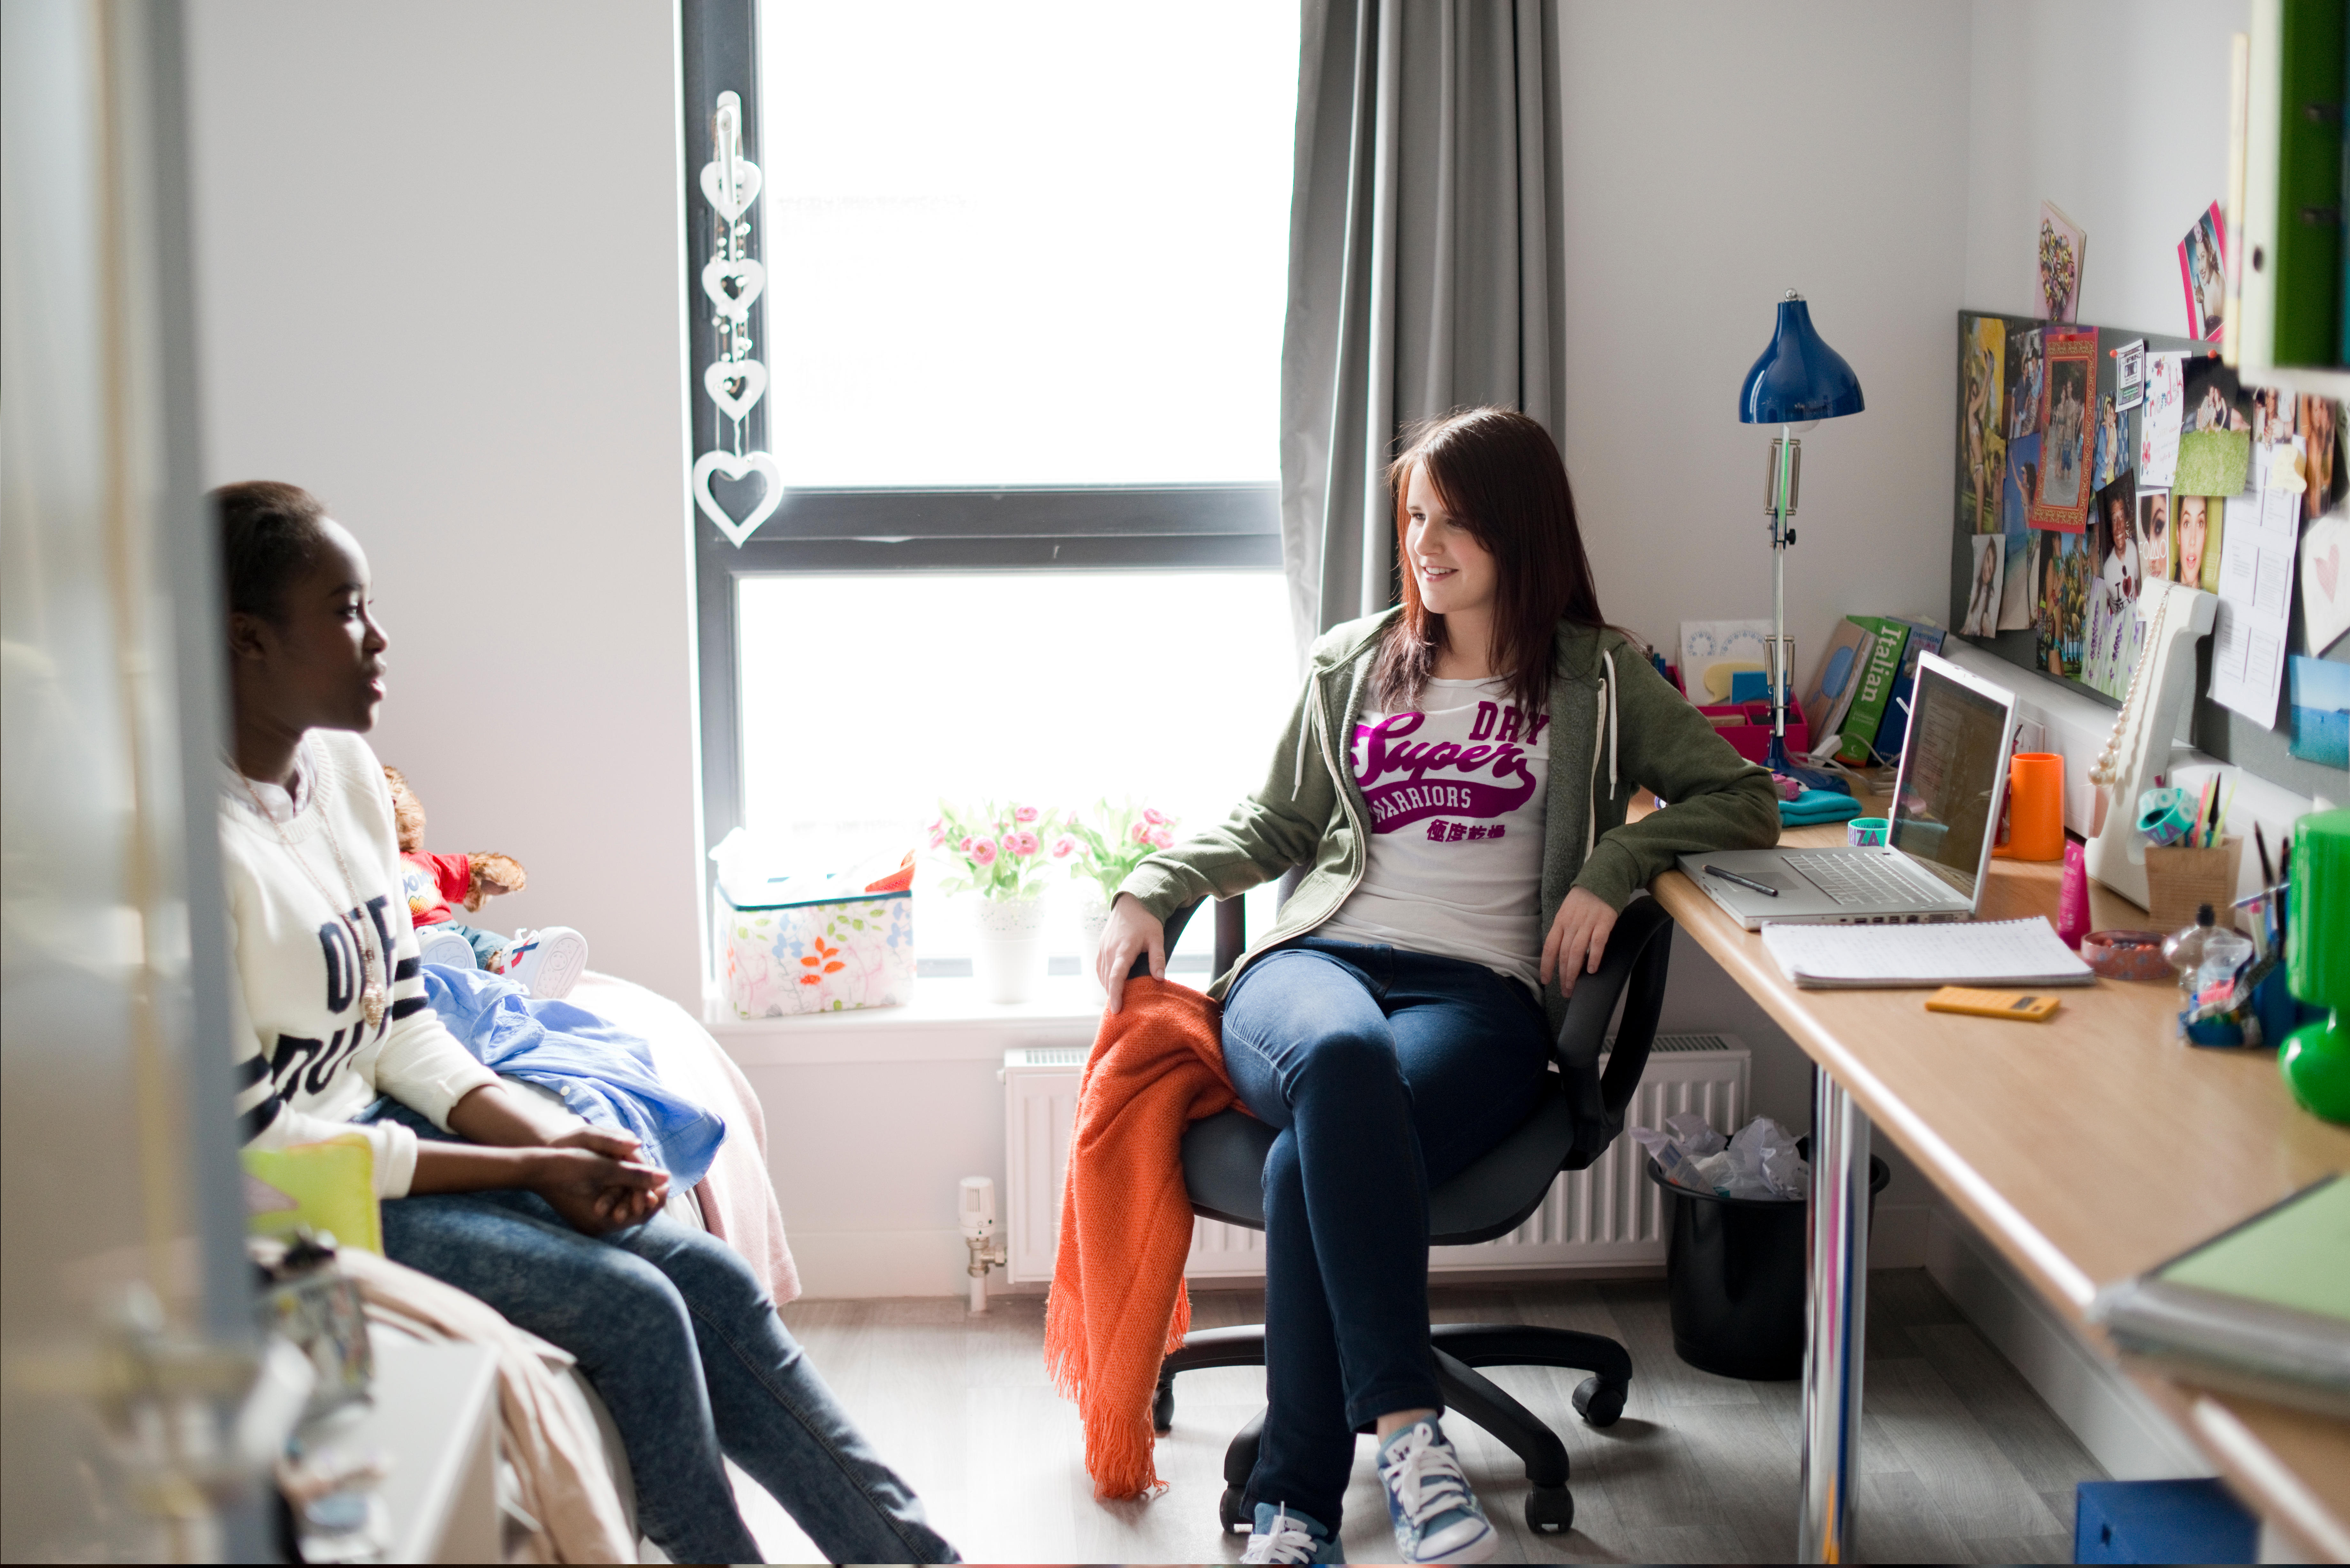 Students at Storie Street Paisley Accommodation | UWS | University of the West of Scotland